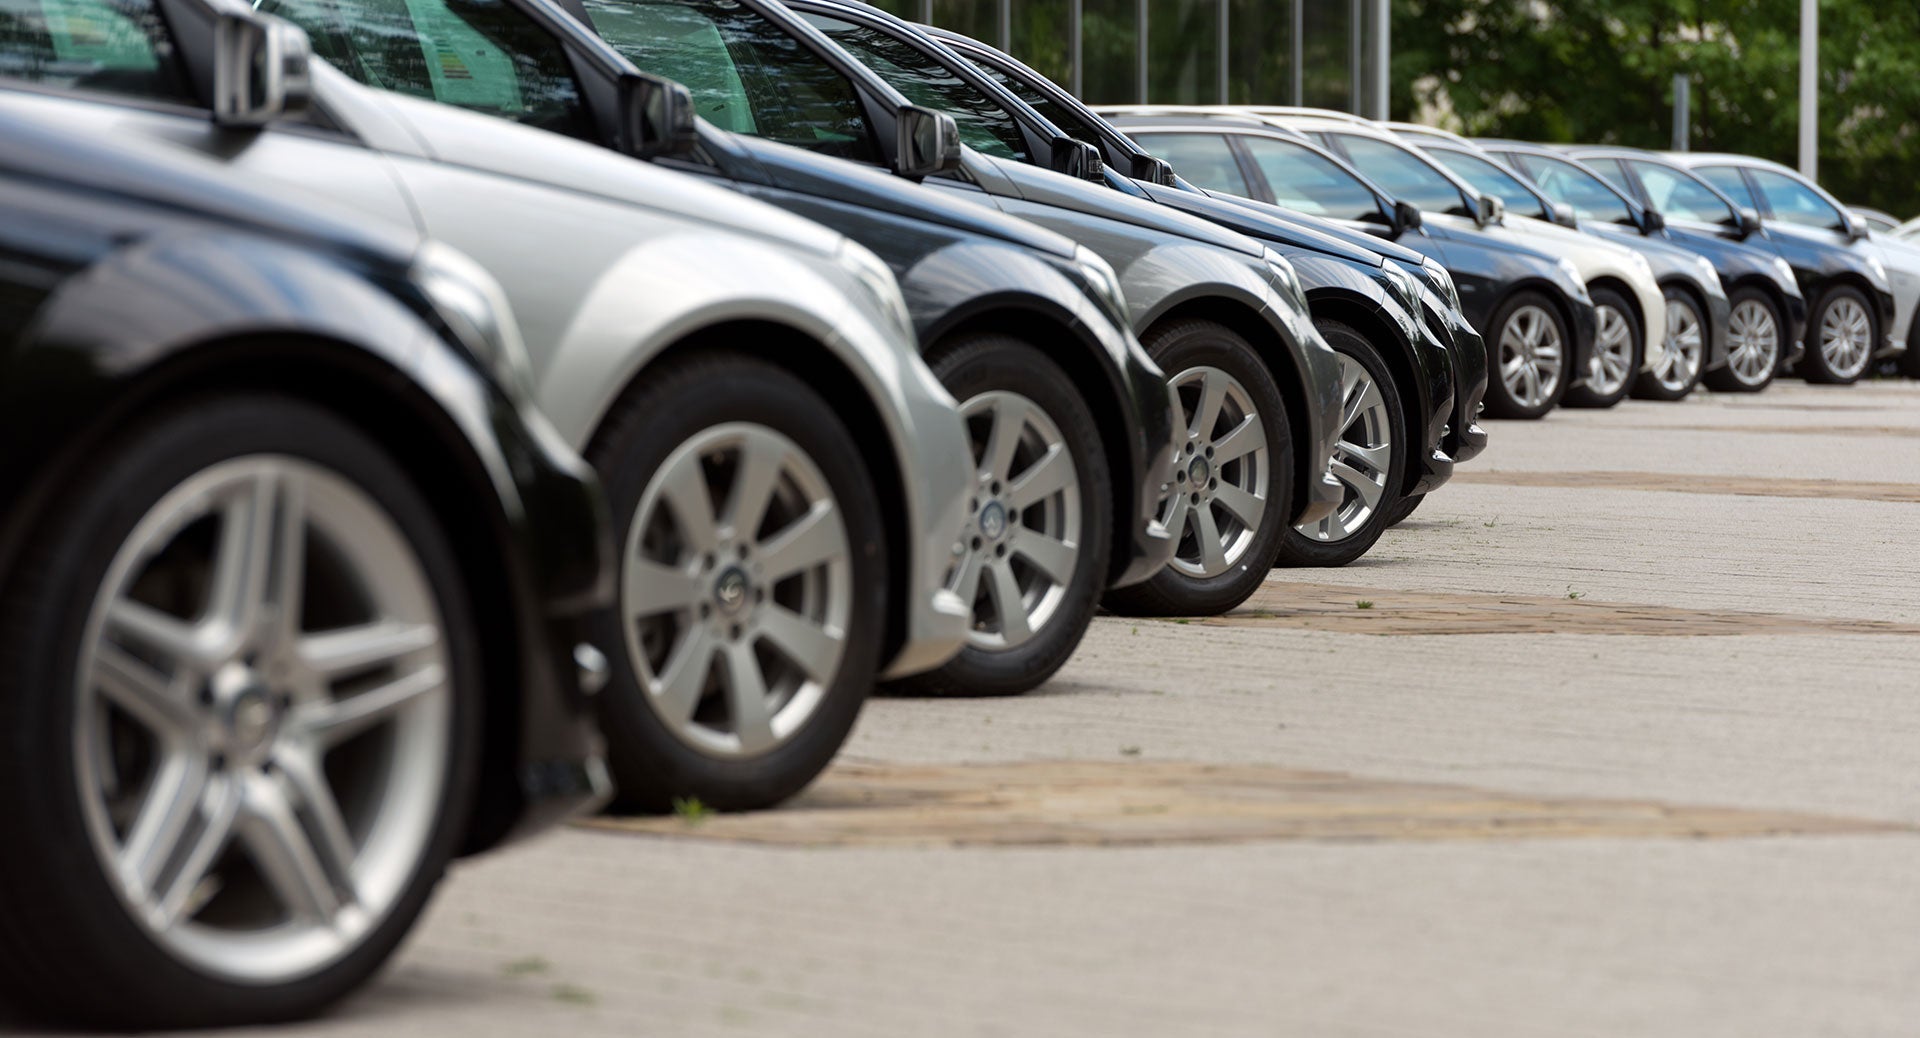 We Have a Great Selection of Used Vehicles to Choose From